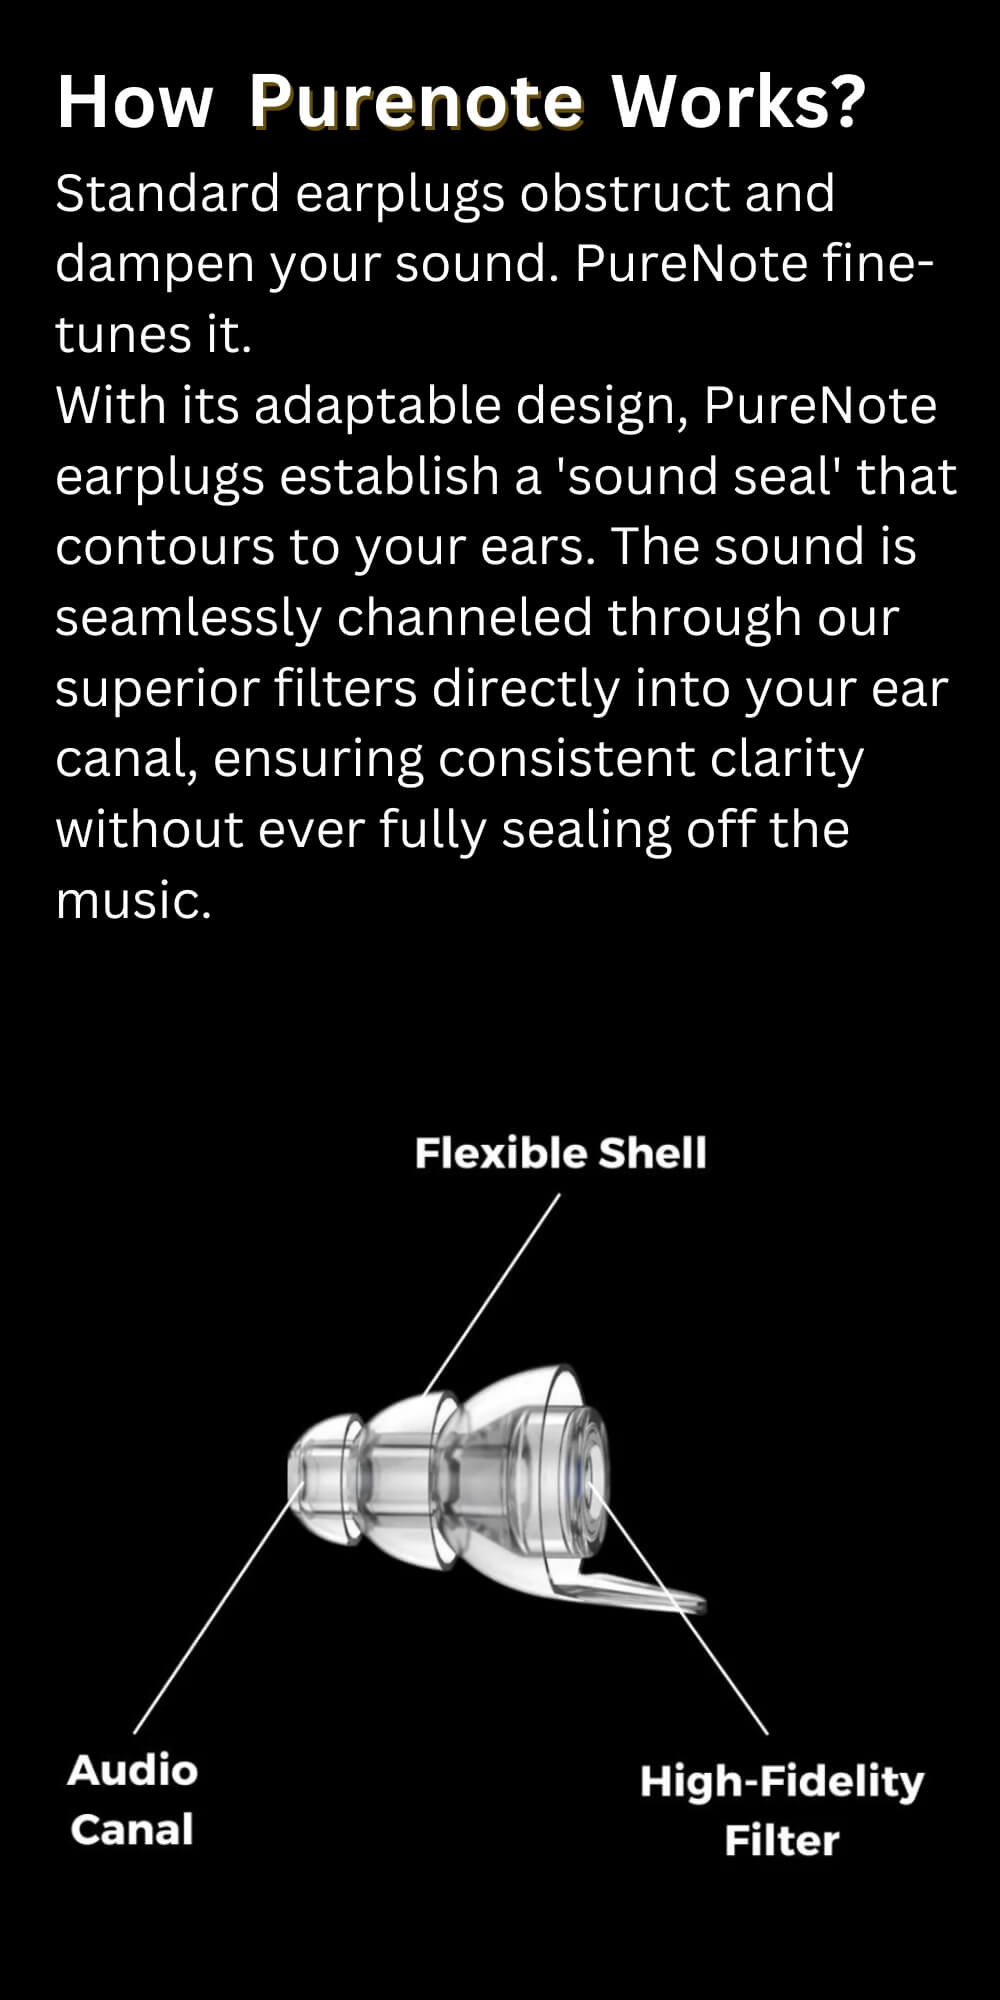 An informative image depicting the CFG PureNote earplugs, highlighting their unique design with labeled parts: a 'Flexible Shell' and 'High-Fidelity Filter', accompanied by an explanatory text on how PureNote earplugs work differently from standard earplugs by fine-tuning rather than blocking sound, providing a 'sound seal' that adapts to the user's ears, and directing music through superior filters for a clear, uninterrupted audio experience.